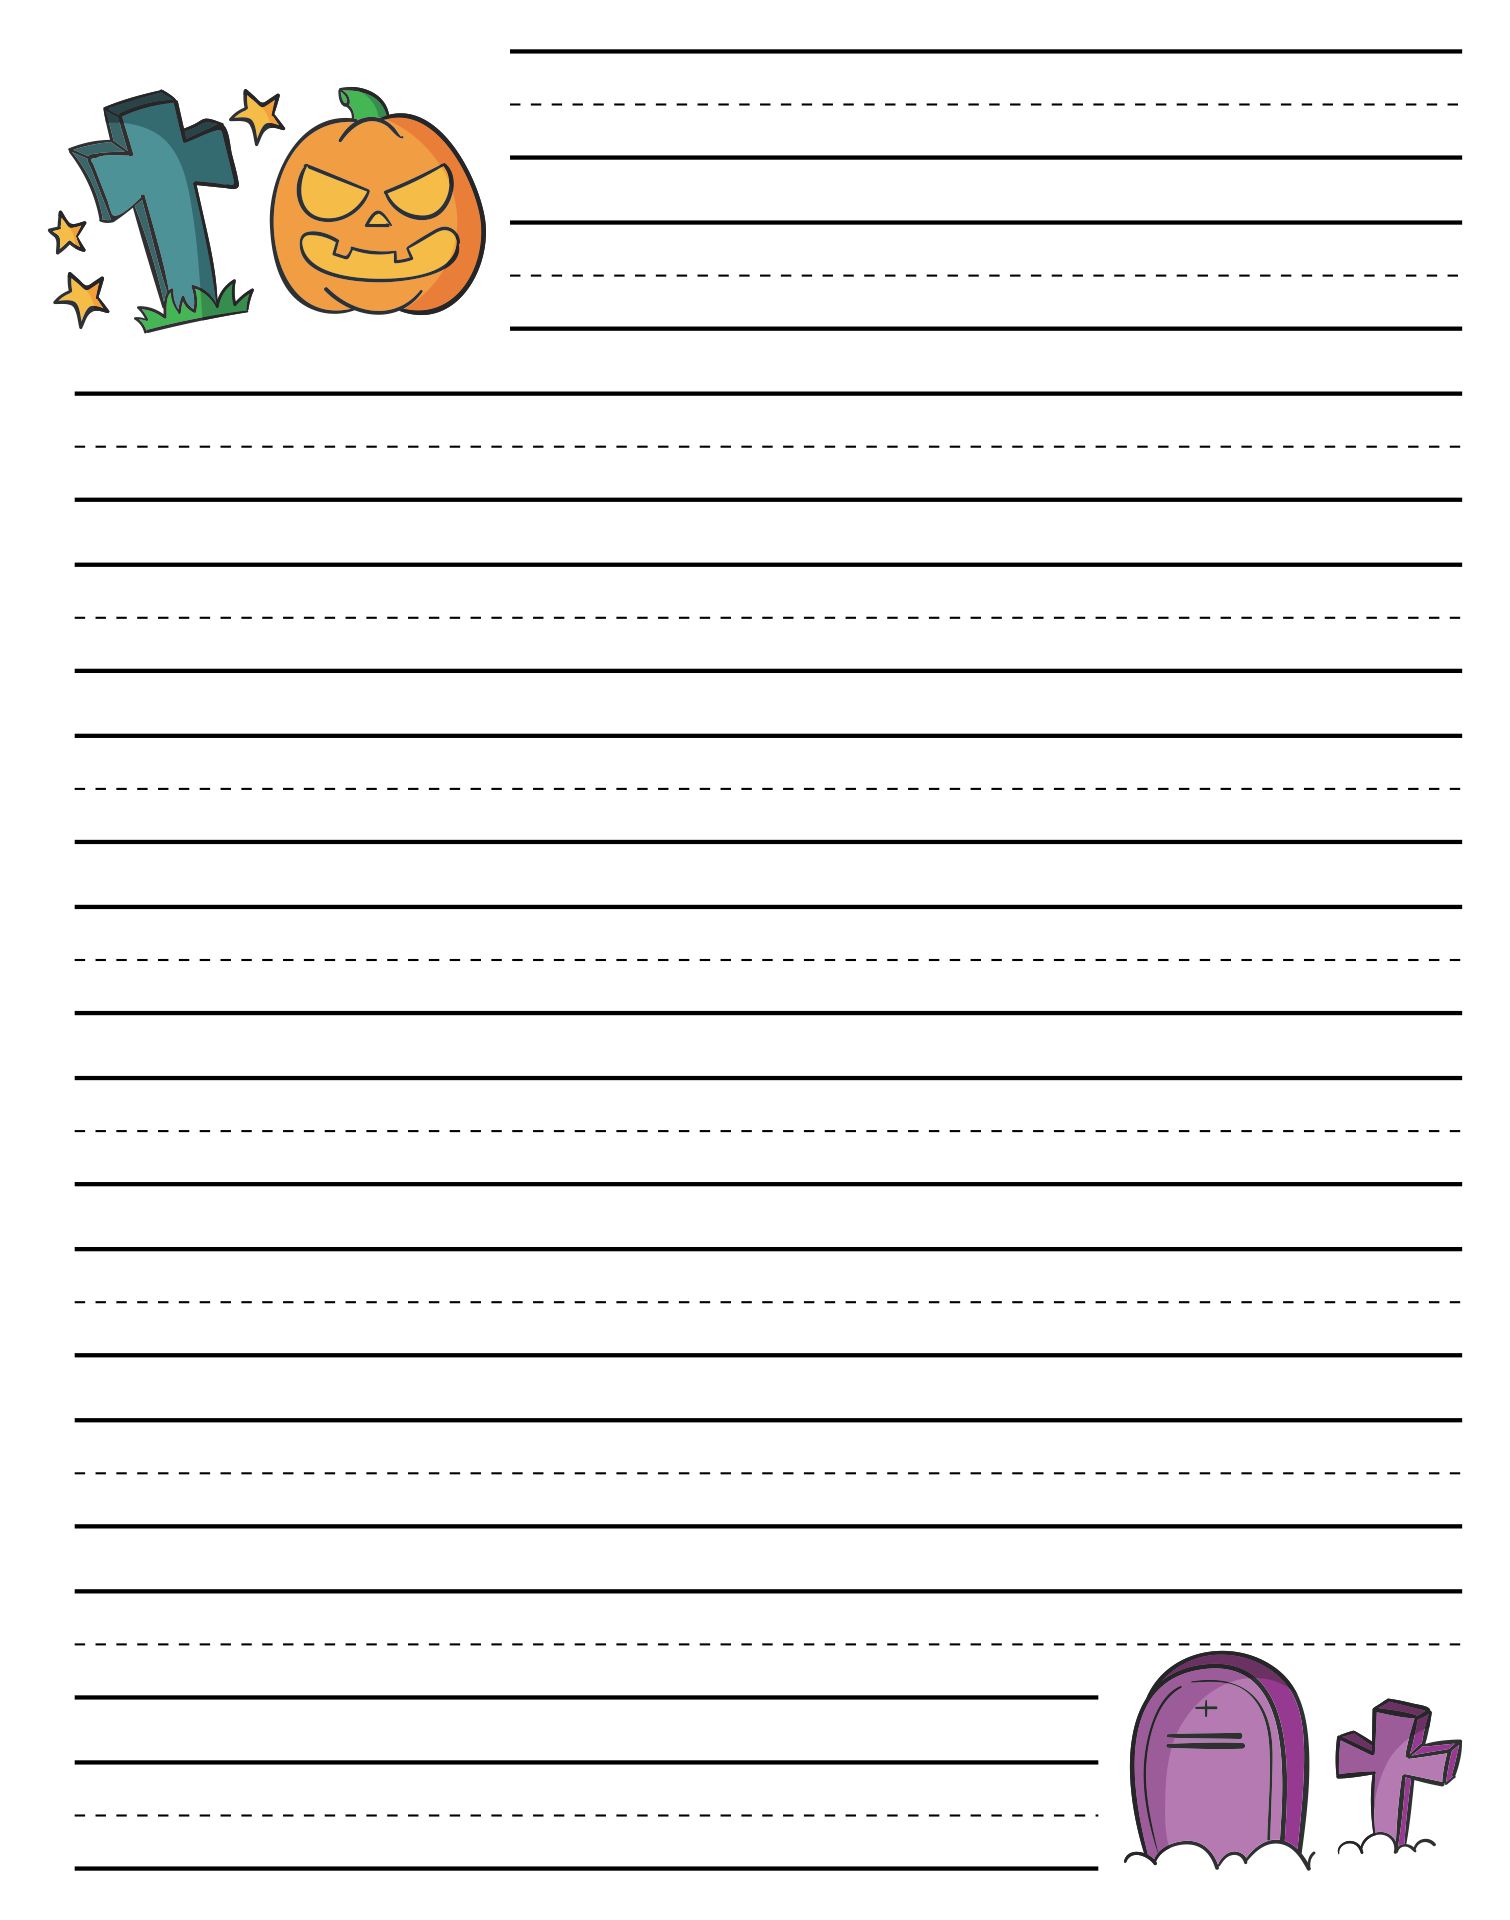 free-printable-halloween-border-paper-for-teachers-and-students